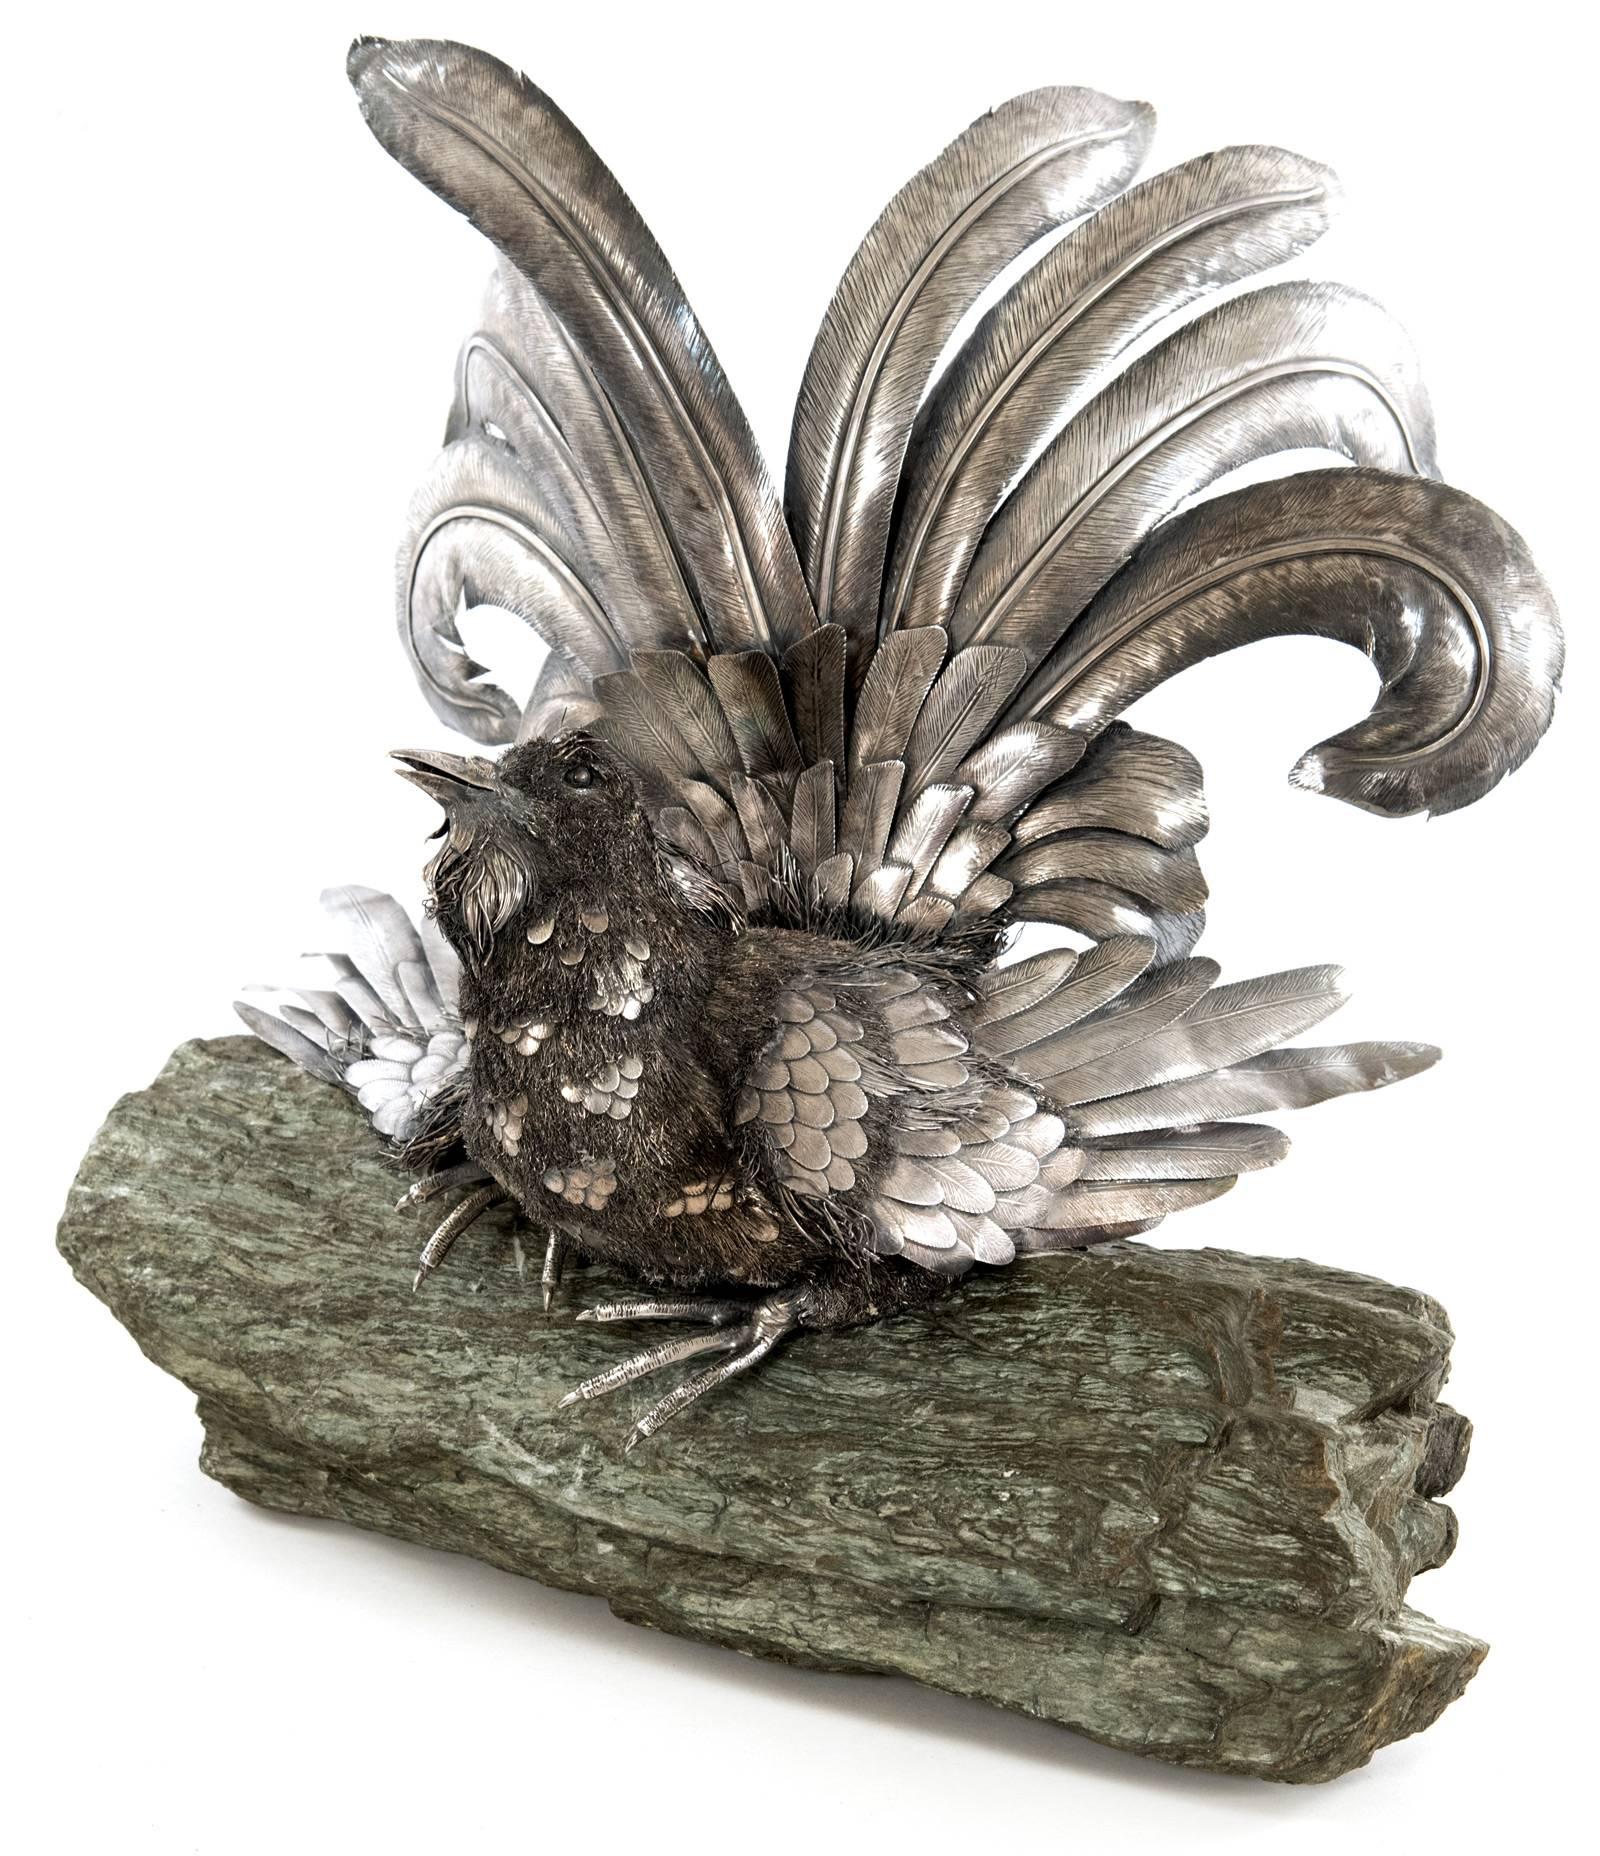 An Italian silver figure of a black grouse displaying its tail feathers while perched on a stone tree branch made in the mid-twentieth century by Italian jewelry house Buccellati. The form is realistically modeled as a wirework fighting cock with